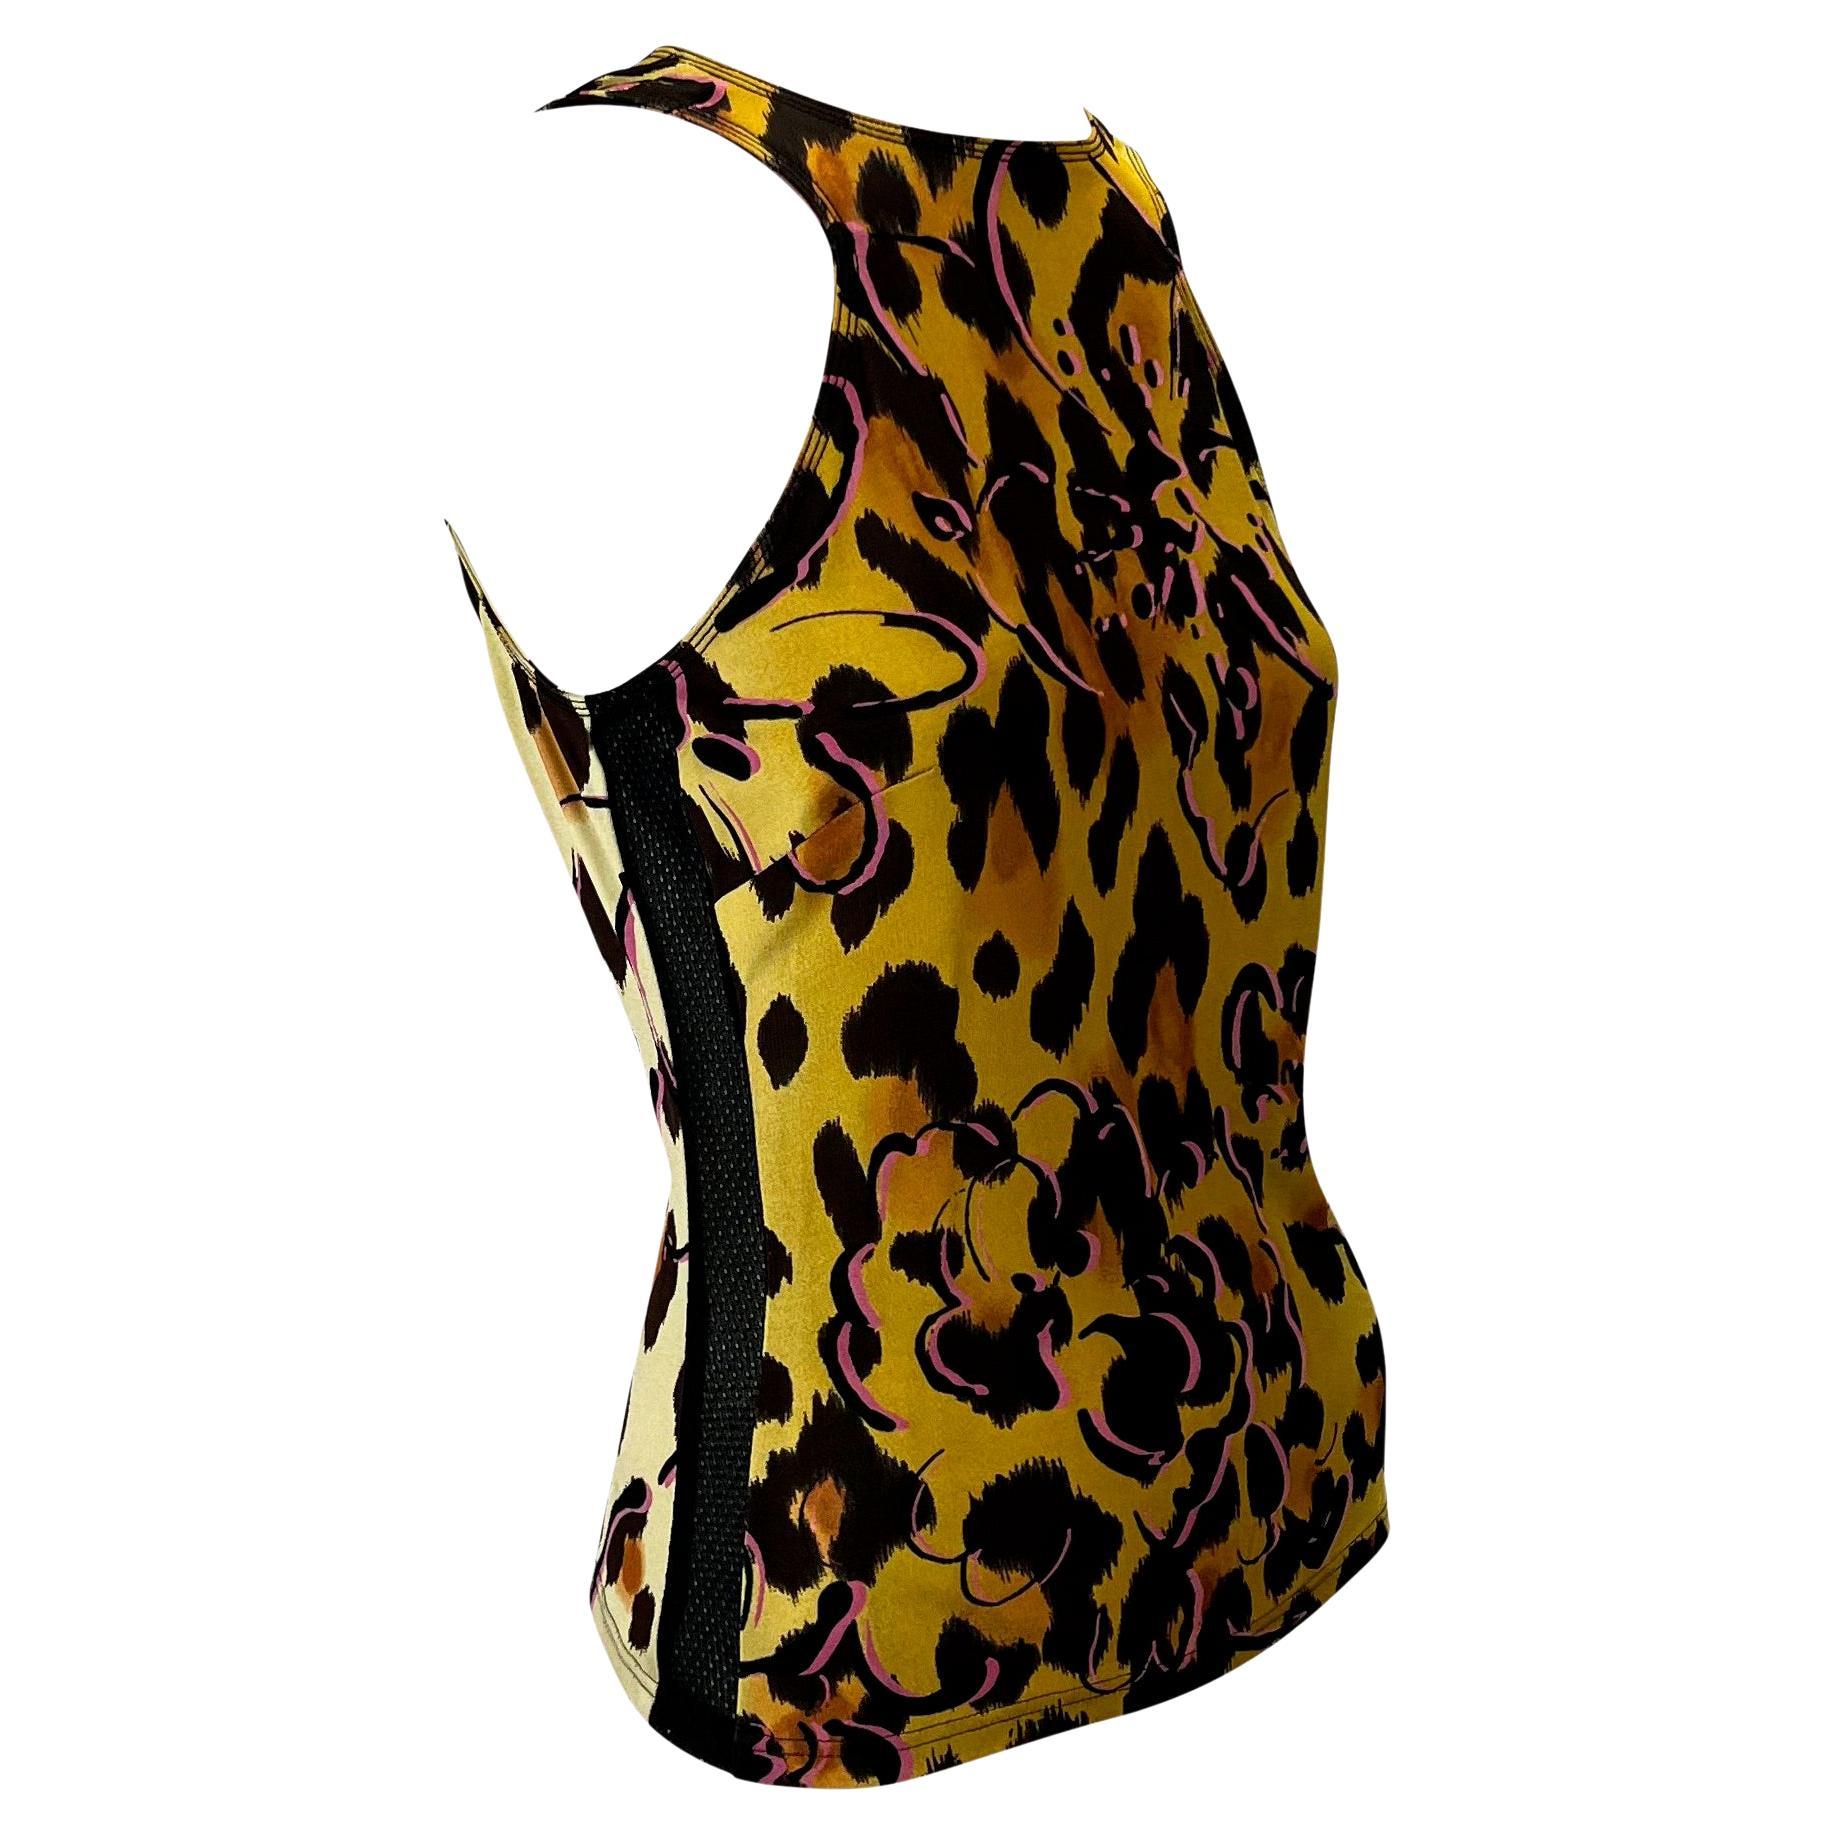 Women's NWT S/S 2002 Gianni Versace by Donatella Animal Print Mesh Tank Top For Sale